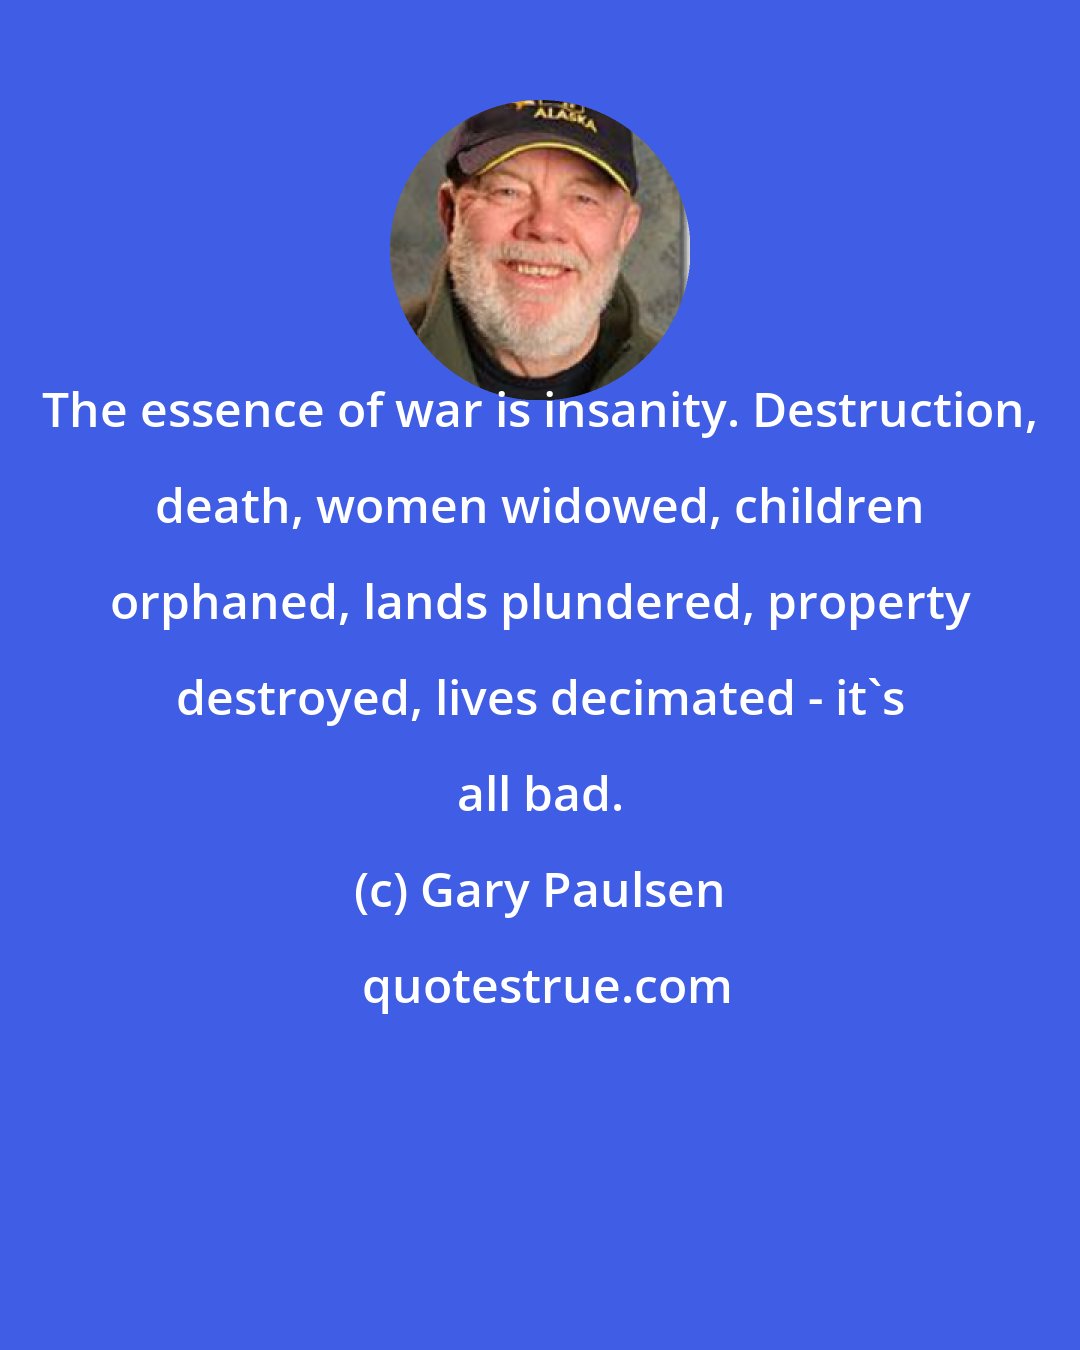 Gary Paulsen: The essence of war is insanity. Destruction, death, women widowed, children orphaned, lands plundered, property destroyed, lives decimated - it's all bad.